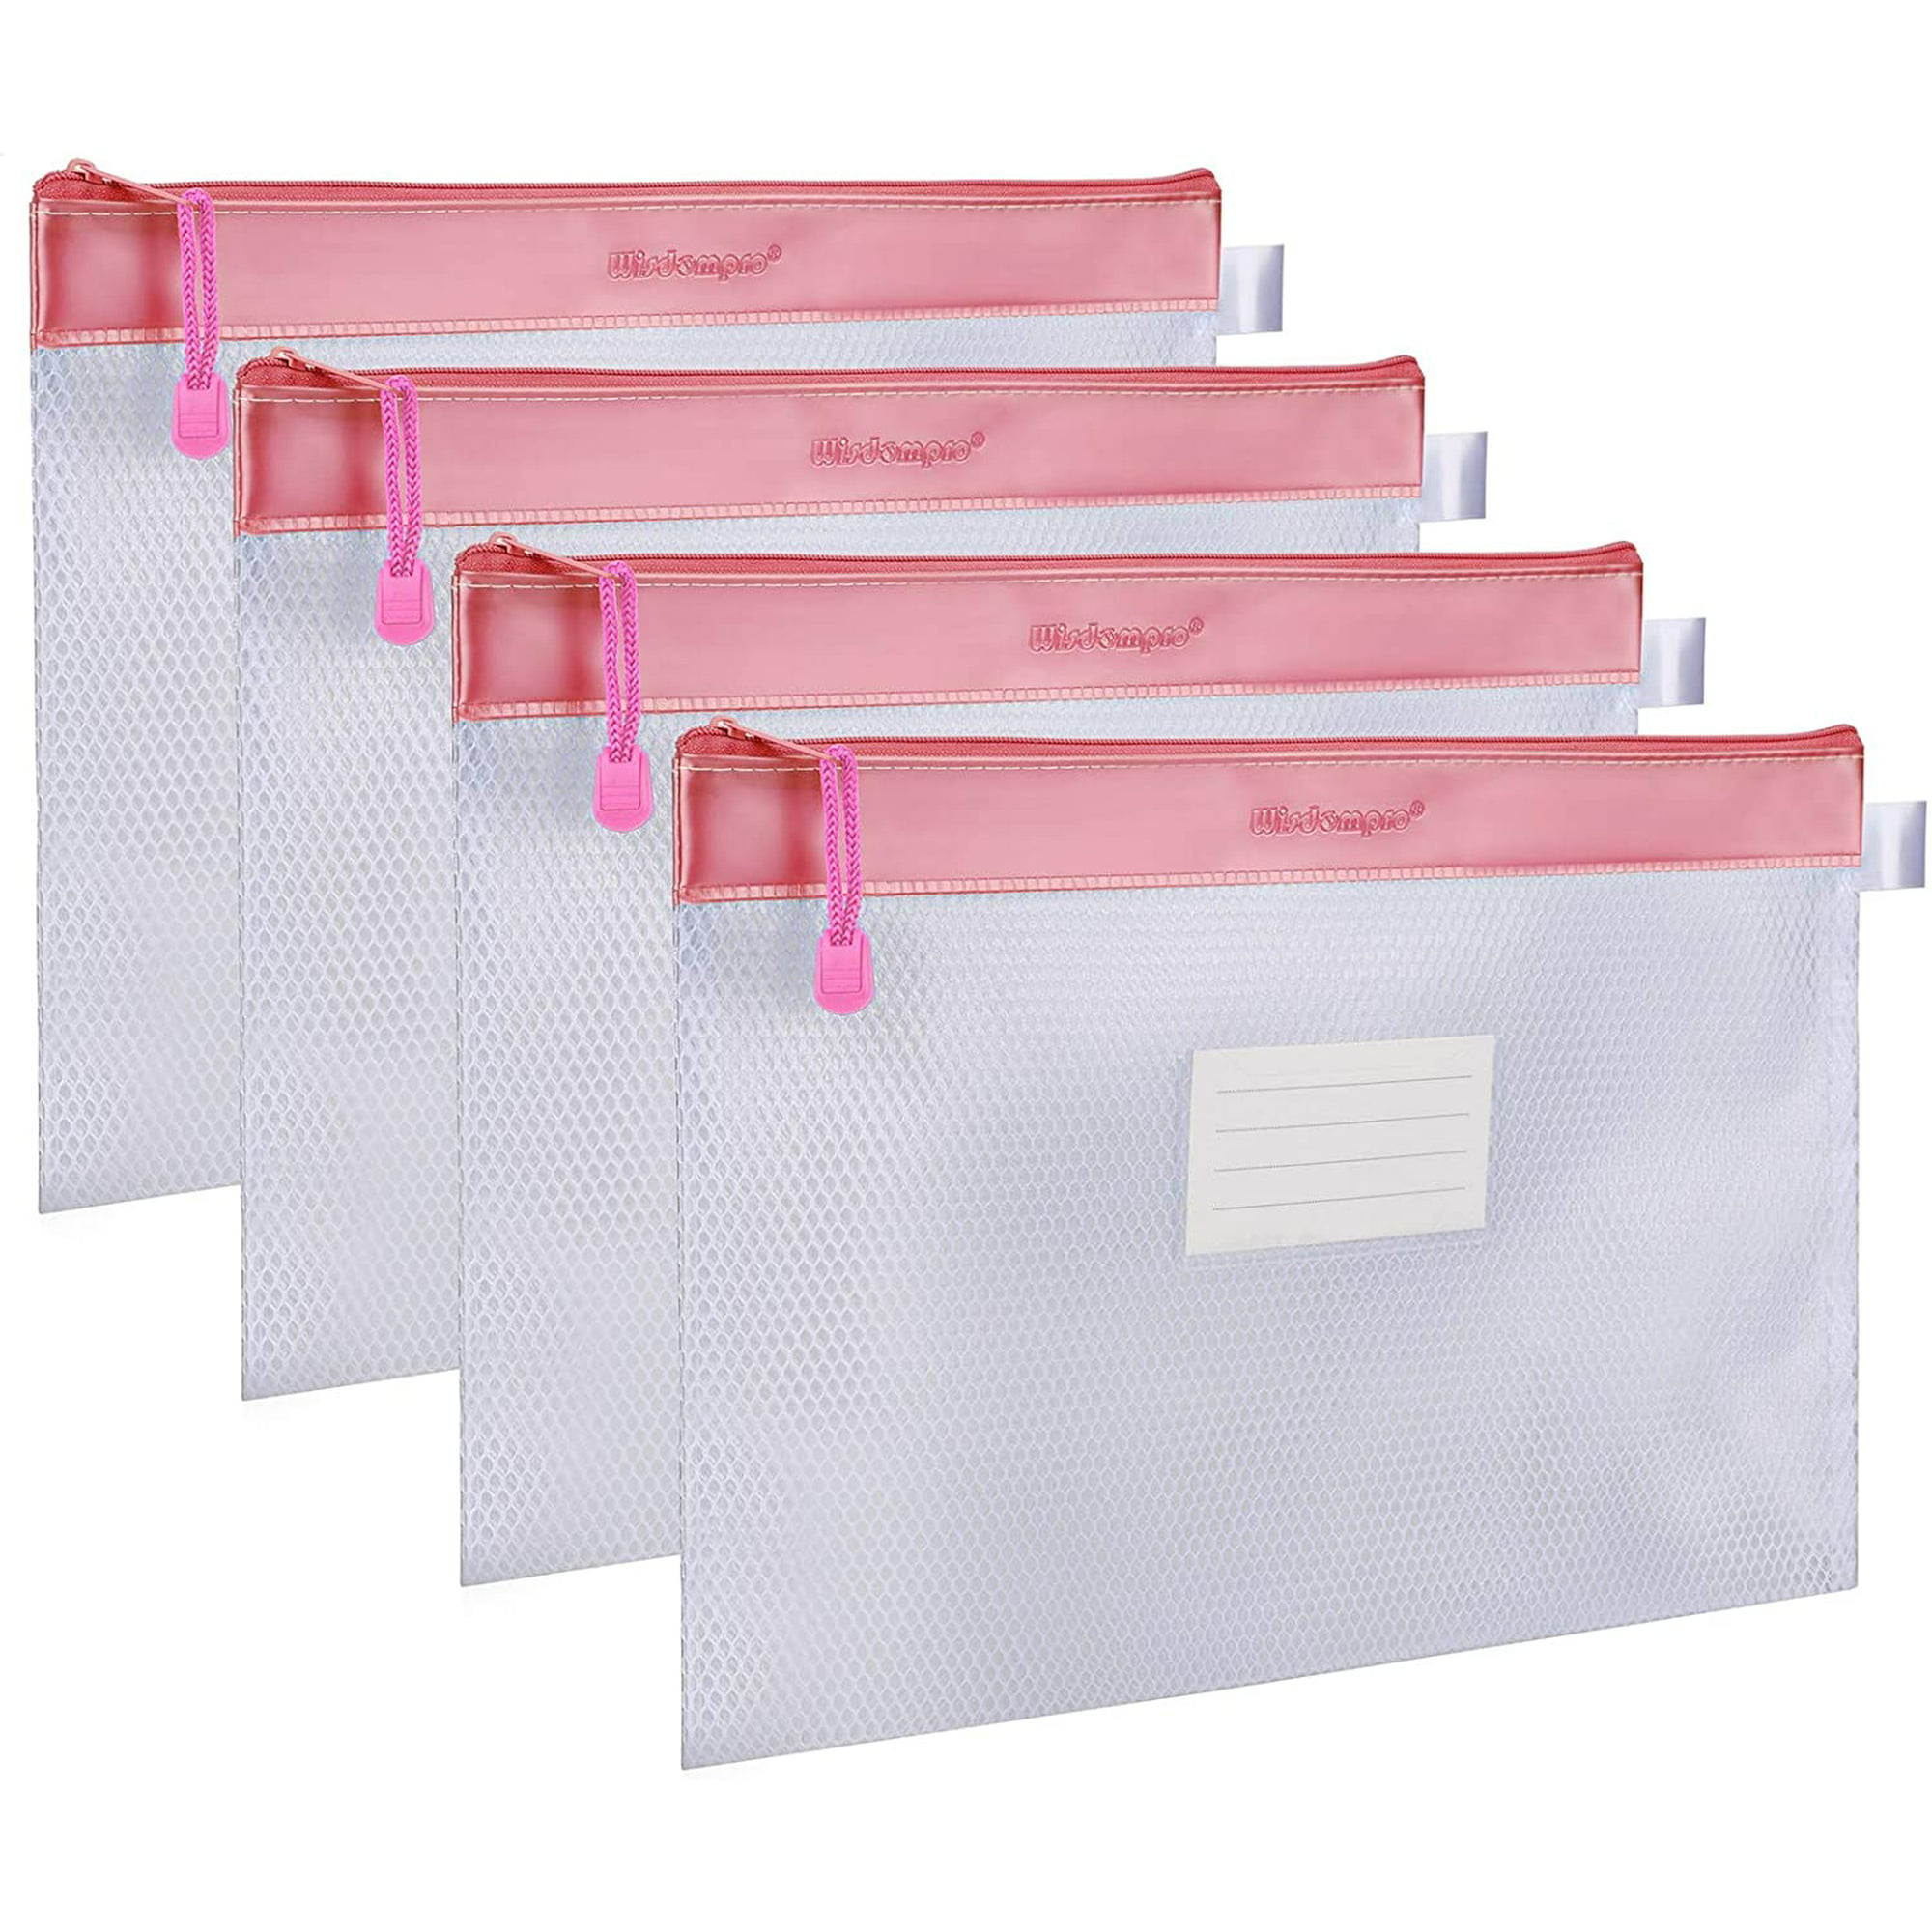 Zipper File Bag, Wisdompro 4 Pack Letter Size Paper Document Storage File Zipper Pouches Holder with Label Pocket Organizer for Office Documents, Business Receipts, User Manual, Magazines - Blue | Walmart Canada